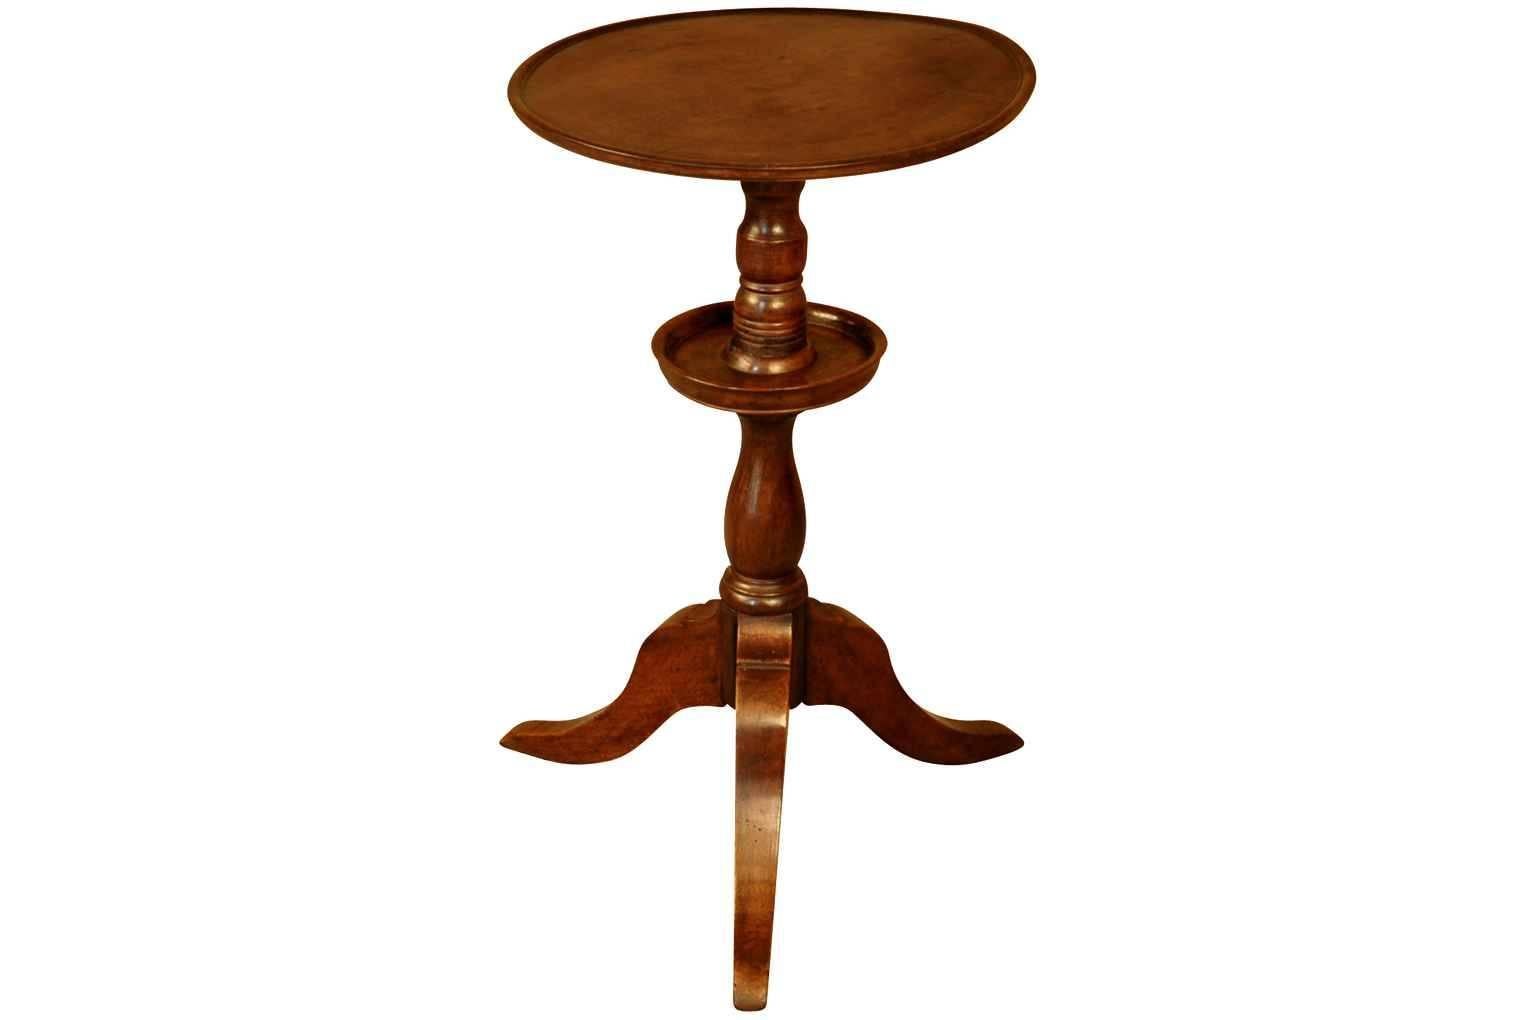 A charming Gueridon from Northern Italy. Beautifully constructed from walnut with tripod feet. A wonderful accent piece for any sitting area.